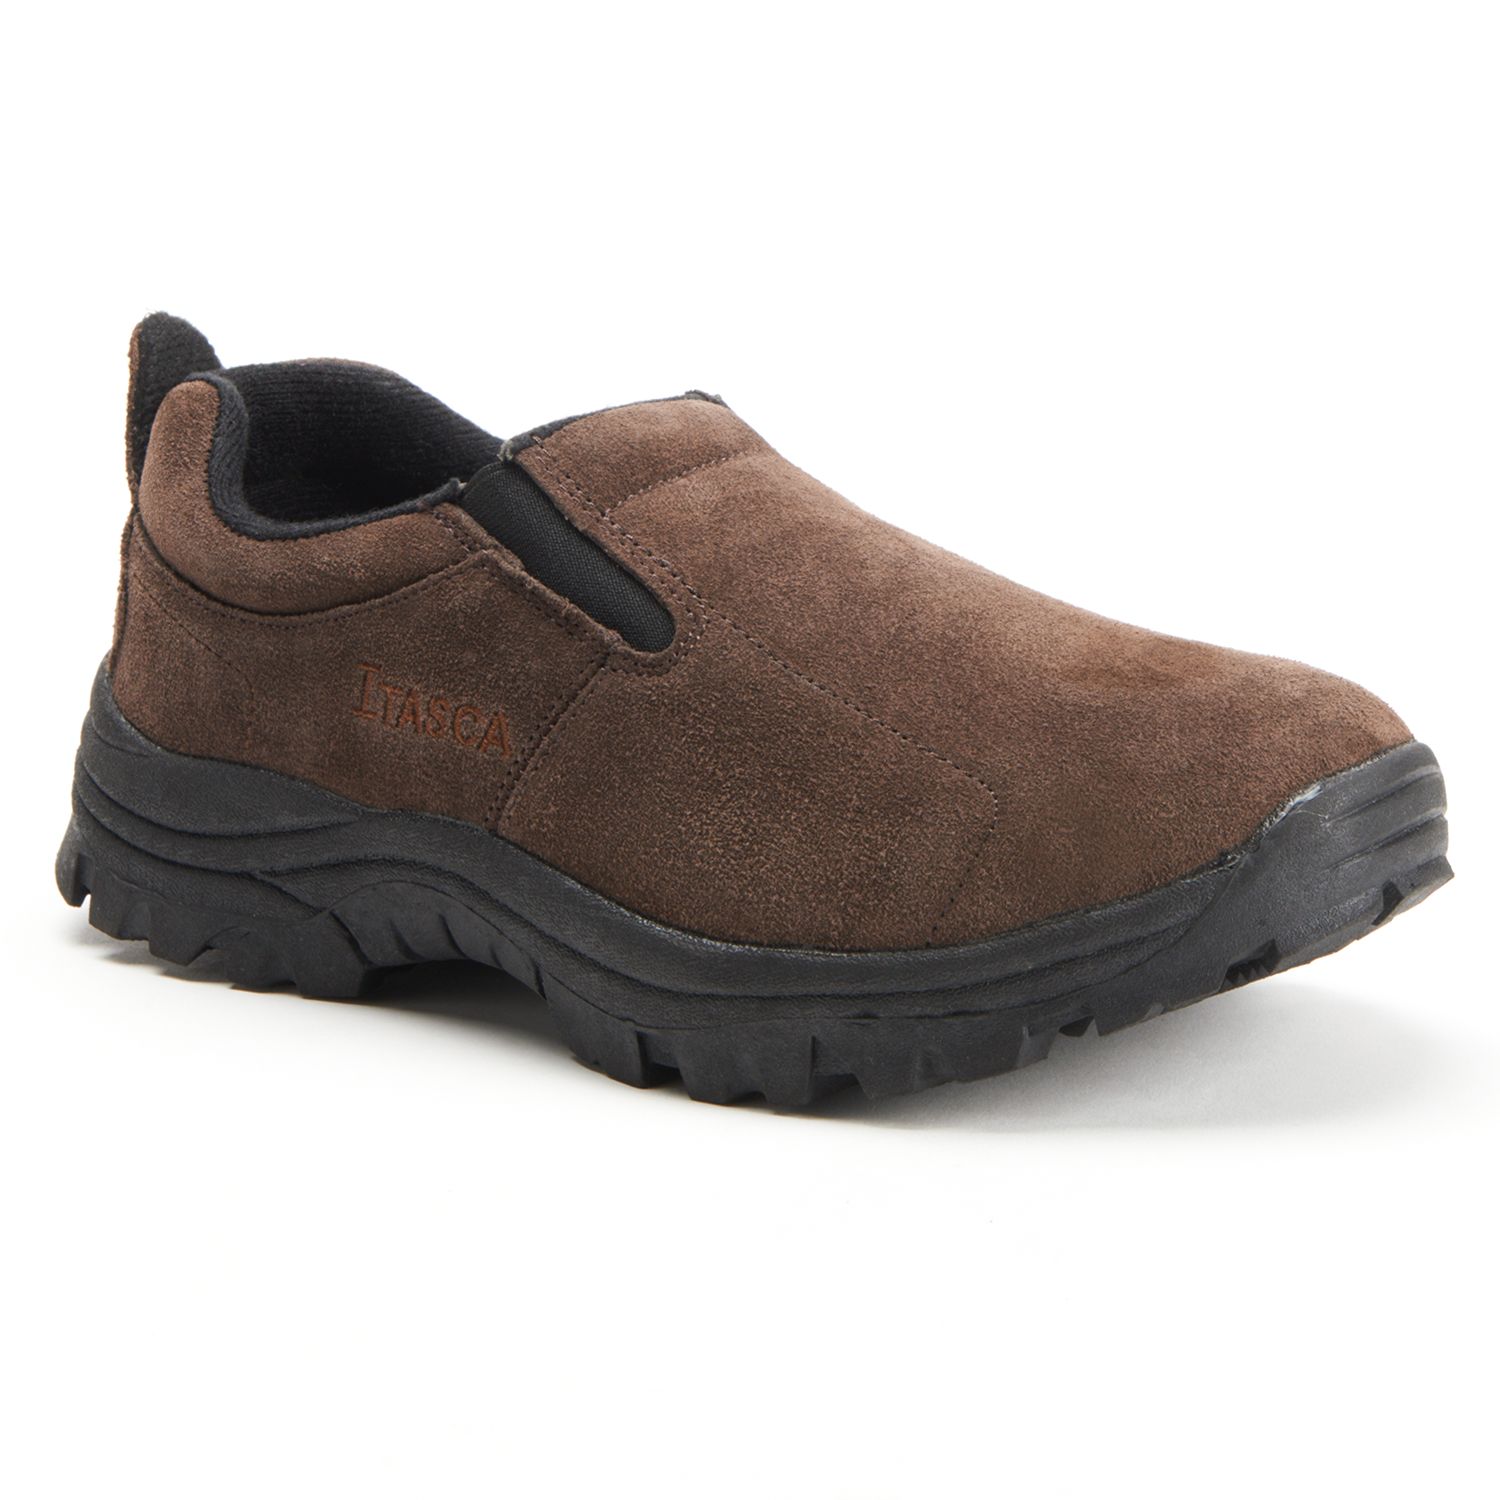 mens brown casual slip on shoes